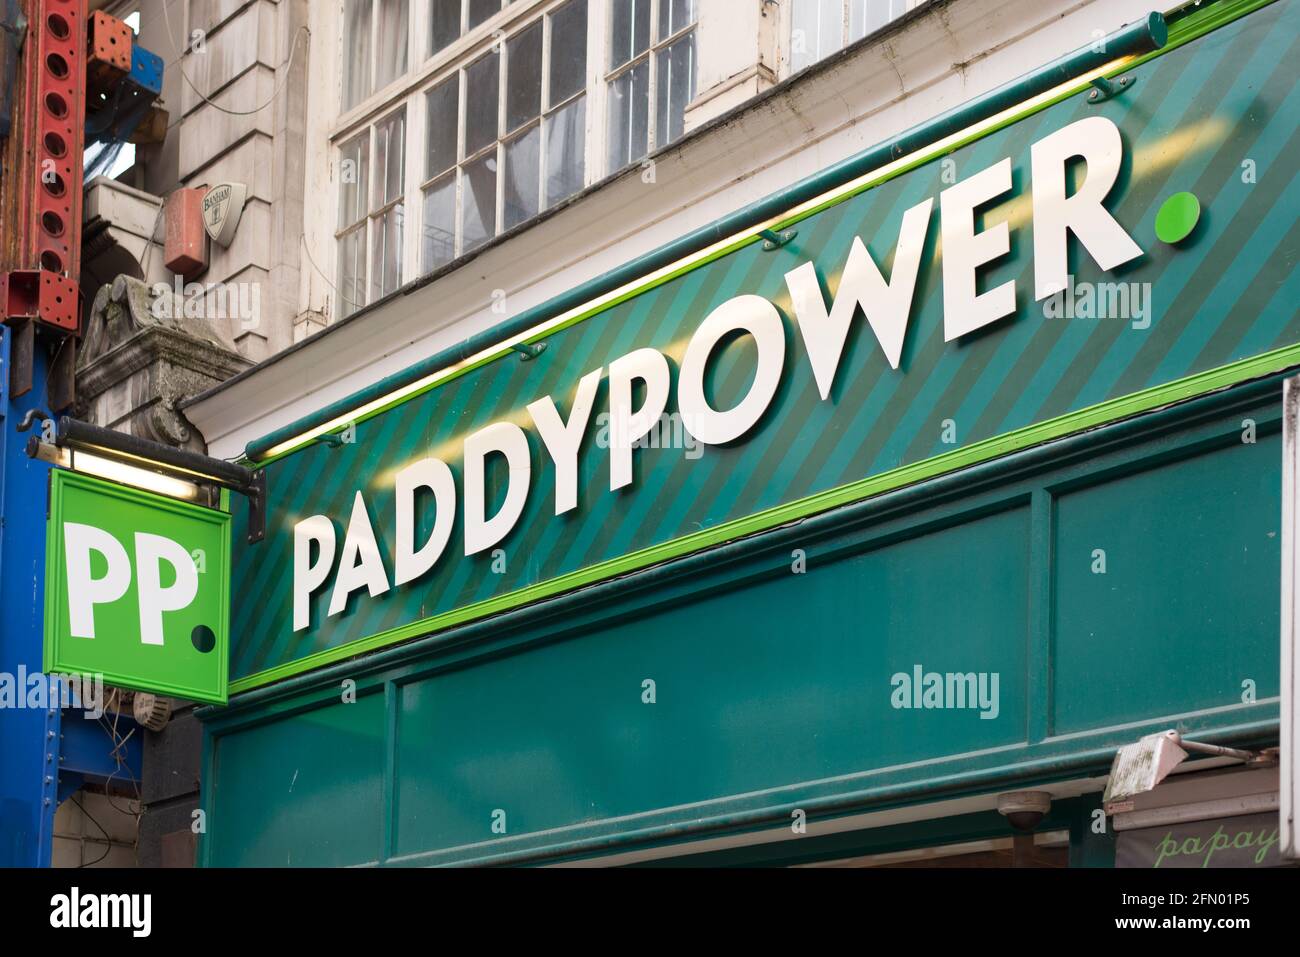 Logo Shop Sign Store Brand Paddypower Bookies Betting Shop Stock Photo